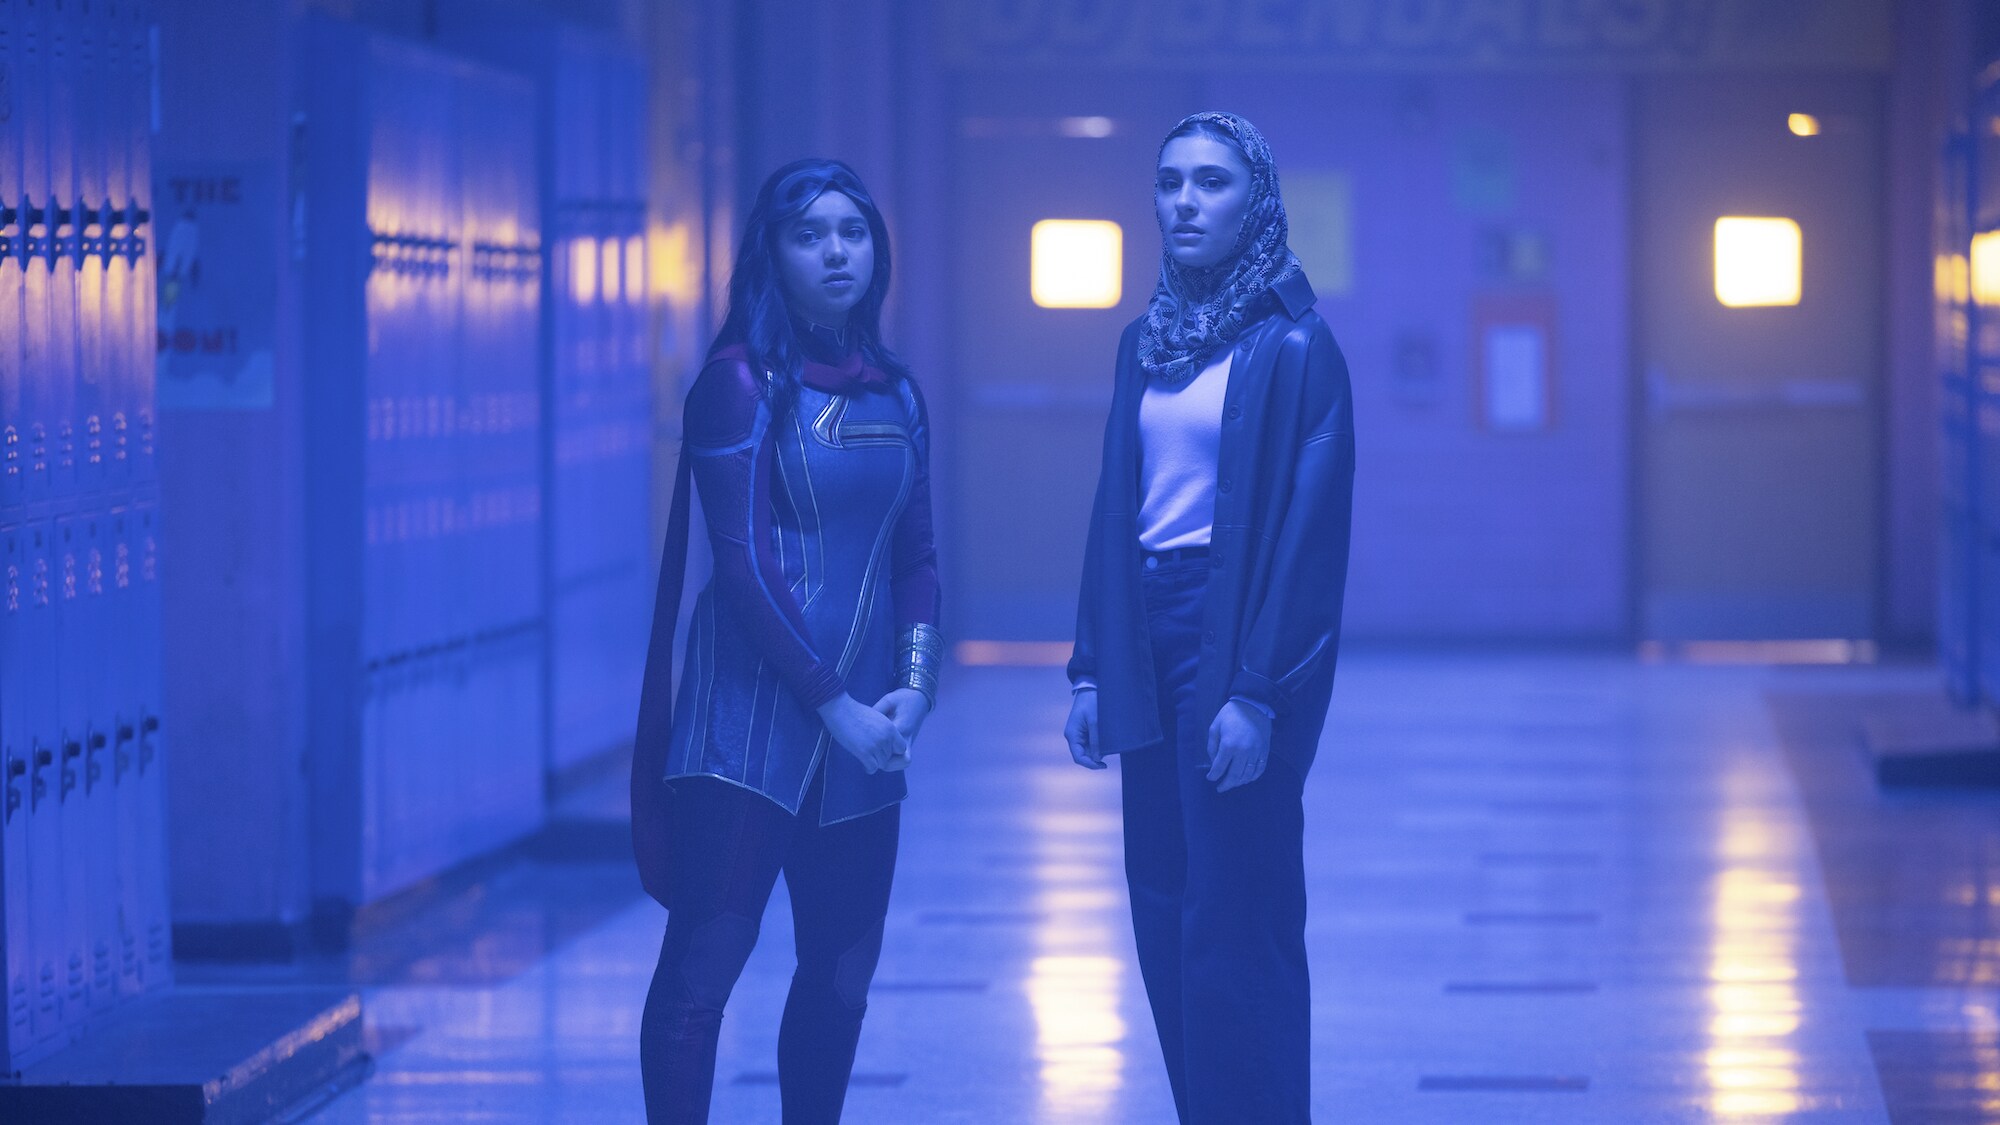 (L-R): Iman Vellani as Kamala Khan/Ms. Marvel and Yasmine Fletcher as Nakia in Marvel Studios' MS. MARVEL, exclusively on Disney+. Photo by Chuck Zlotnick. ©Marvel Studios 2022. All Rights Reserved.